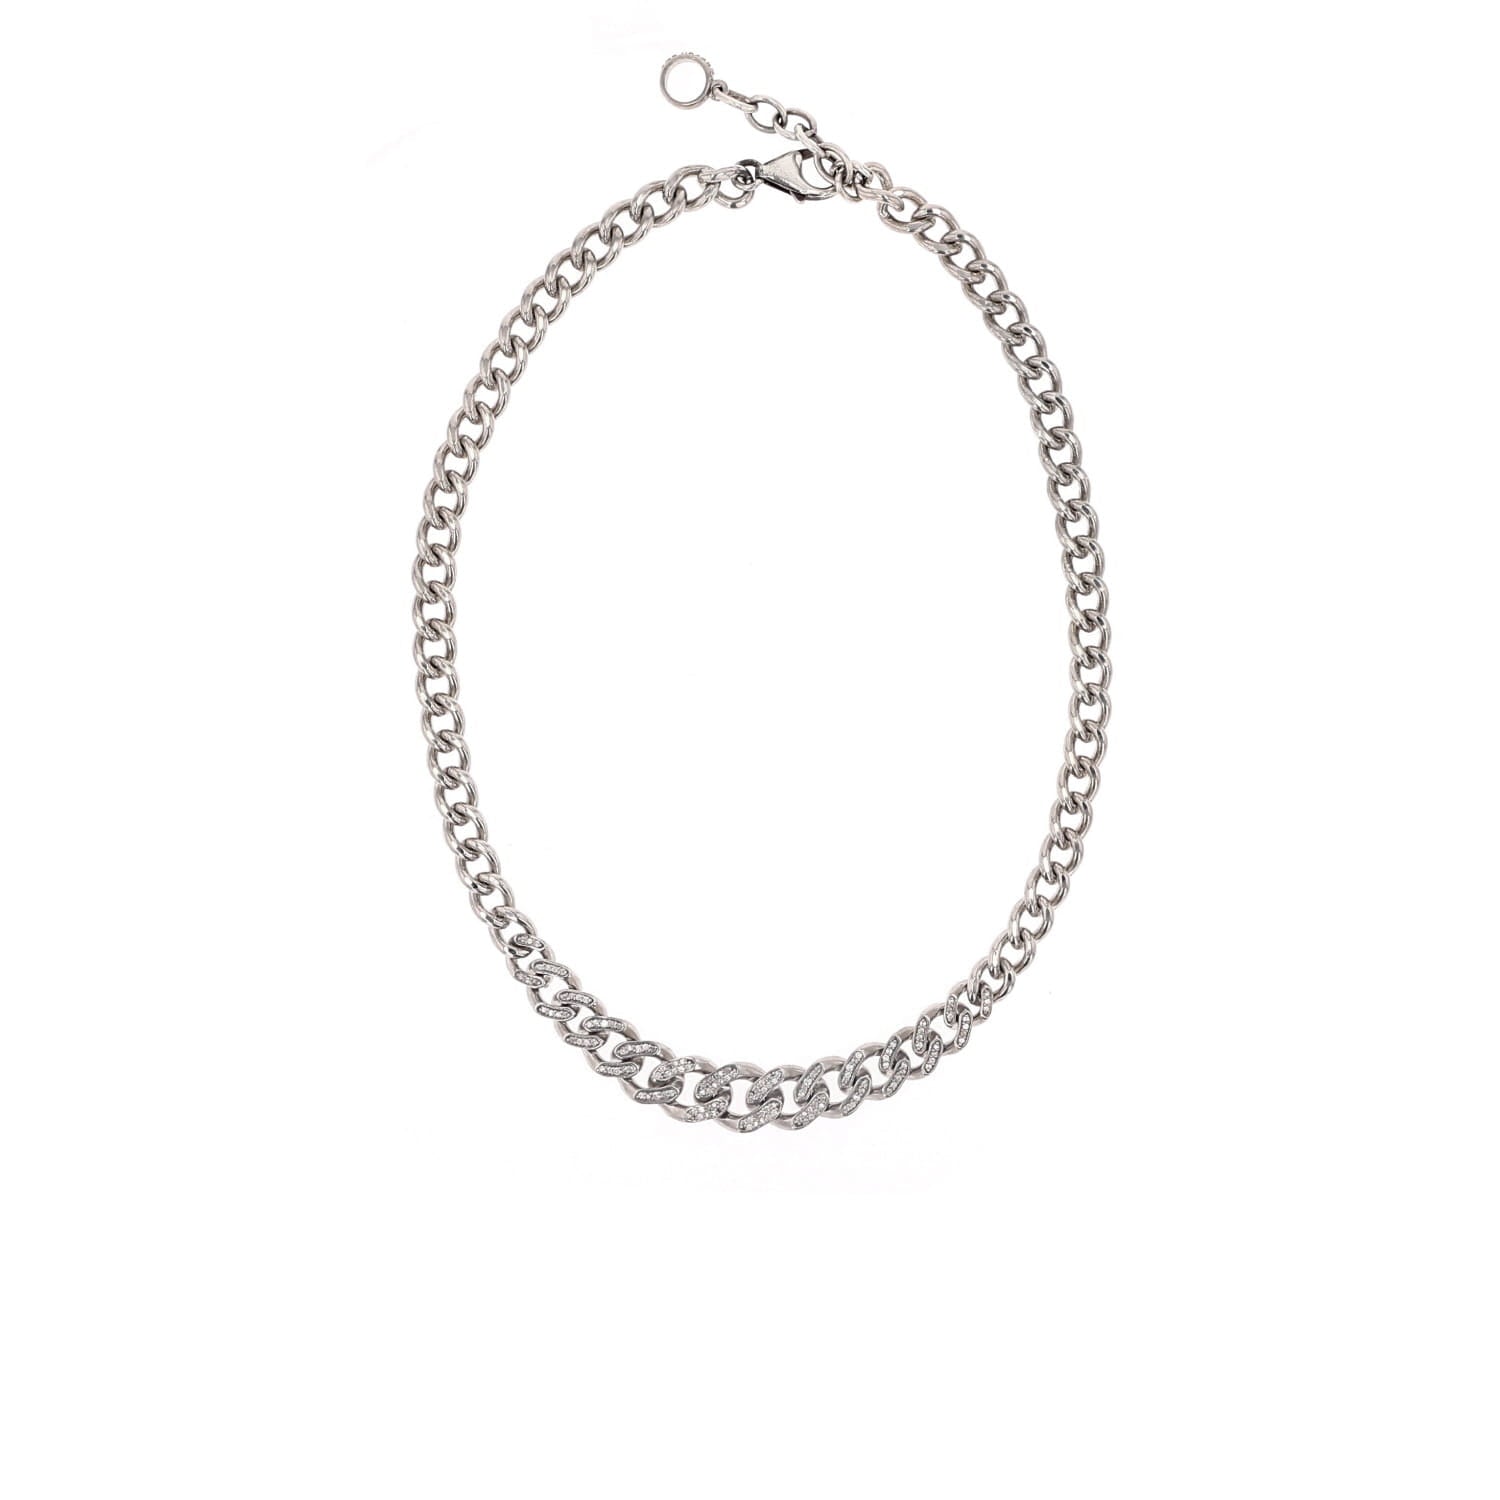 Tapered Cuban Link Chain Necklace with Pave Diamonds - 17"  N0002971 - TBird